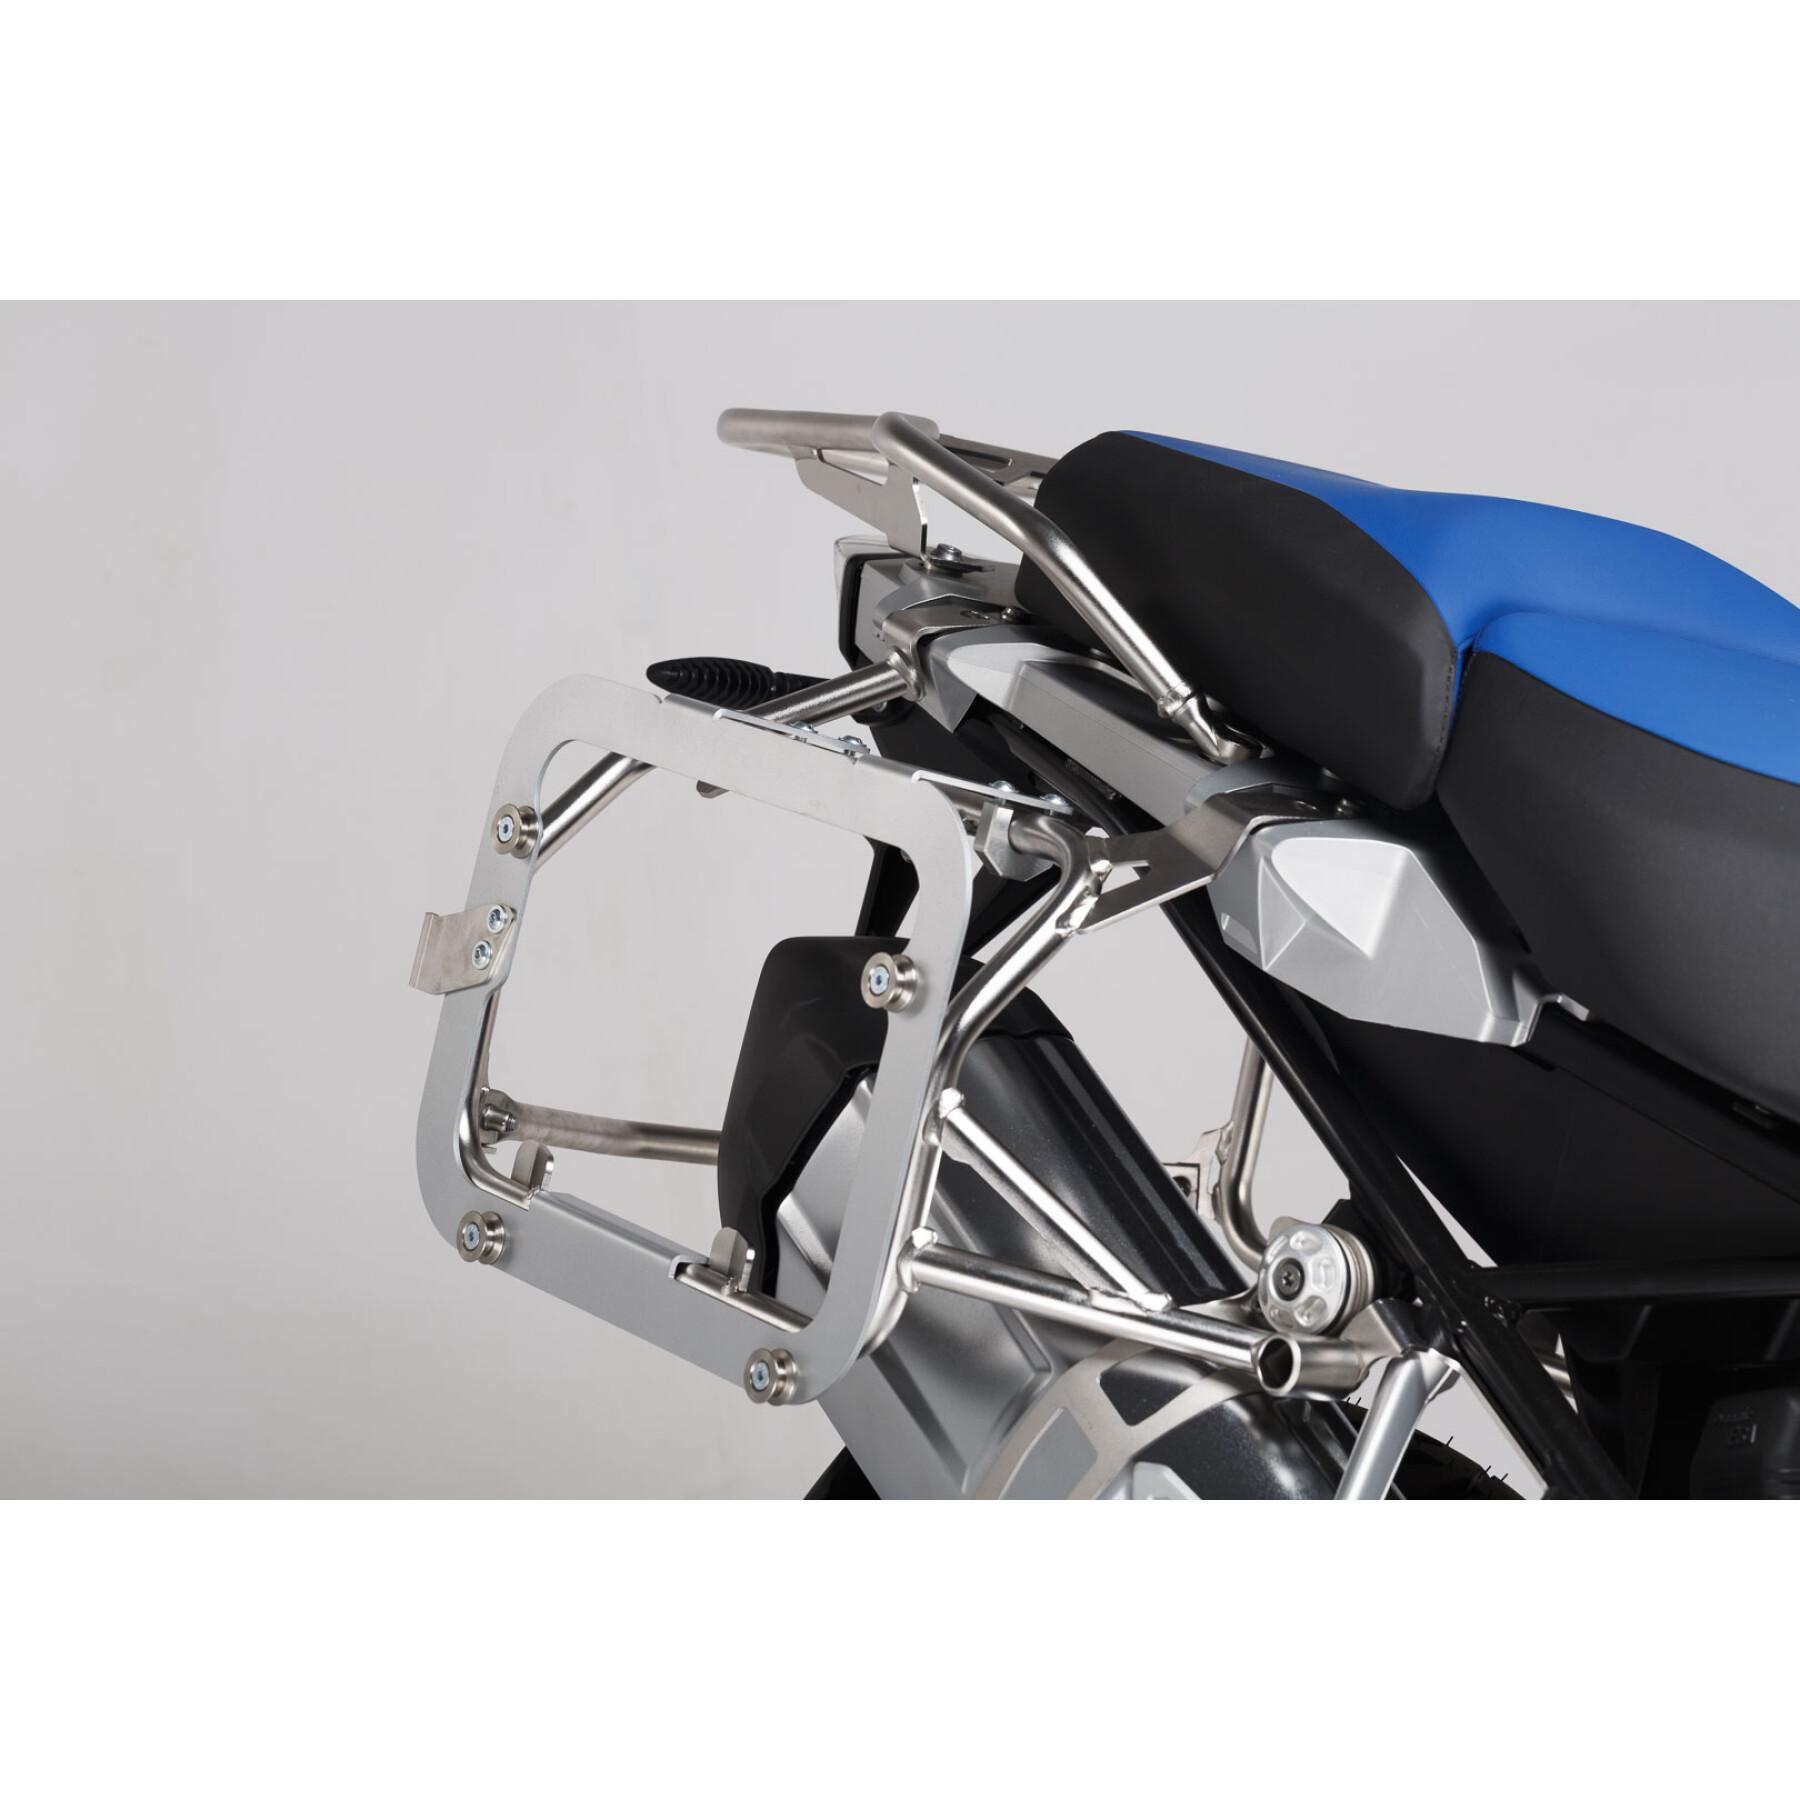 Adaptation kit for motorcycle side-case support SW-Motech R1200/1250GS,F850GS Pour TRAX ADV/EVO/ION.Montage de 2 valises.